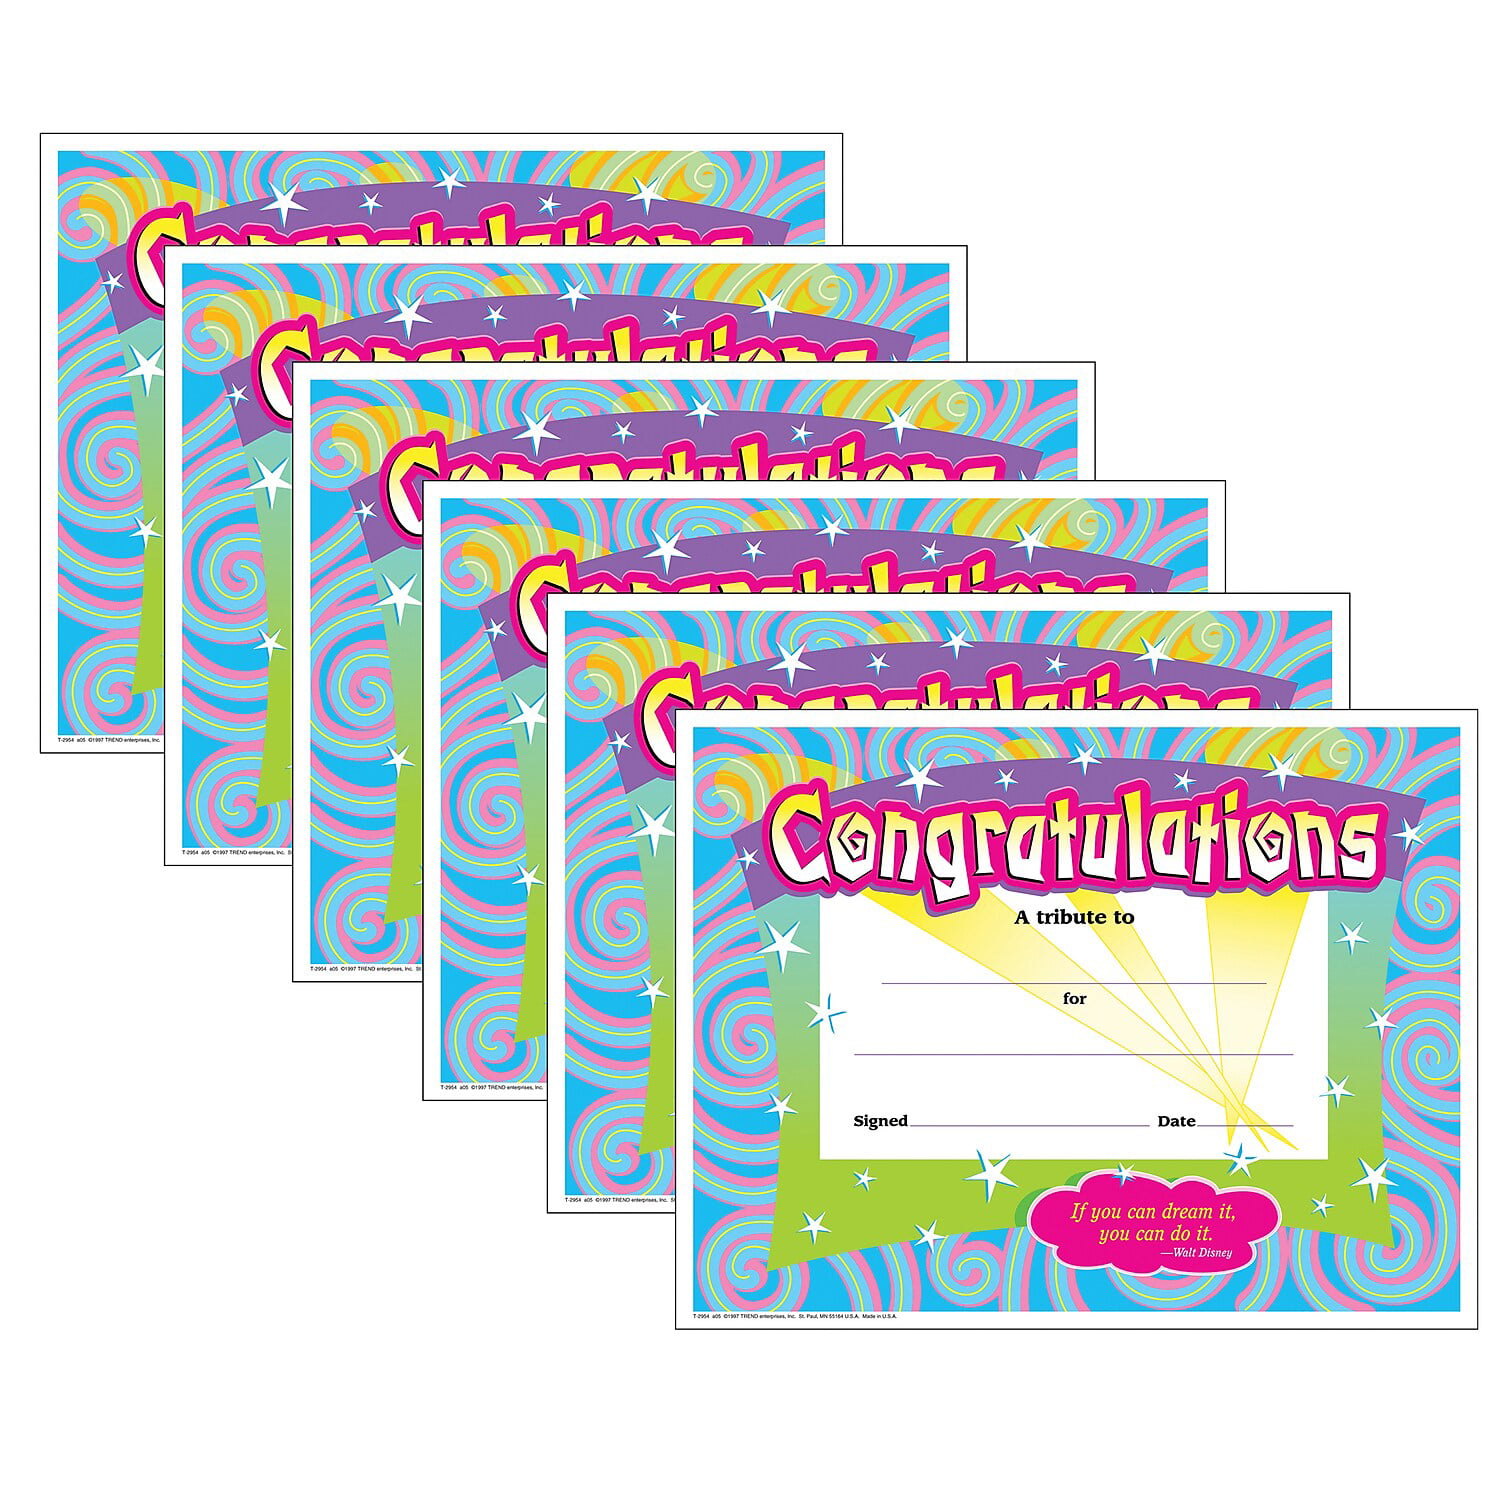 Award  Certificate Supplies Awards  Certificates 30 per Pack Sold as 1  Package Preschool Certificate Colorful Classic Certificates 8 1/2 x 11  Office Supplies usaminimotors.com